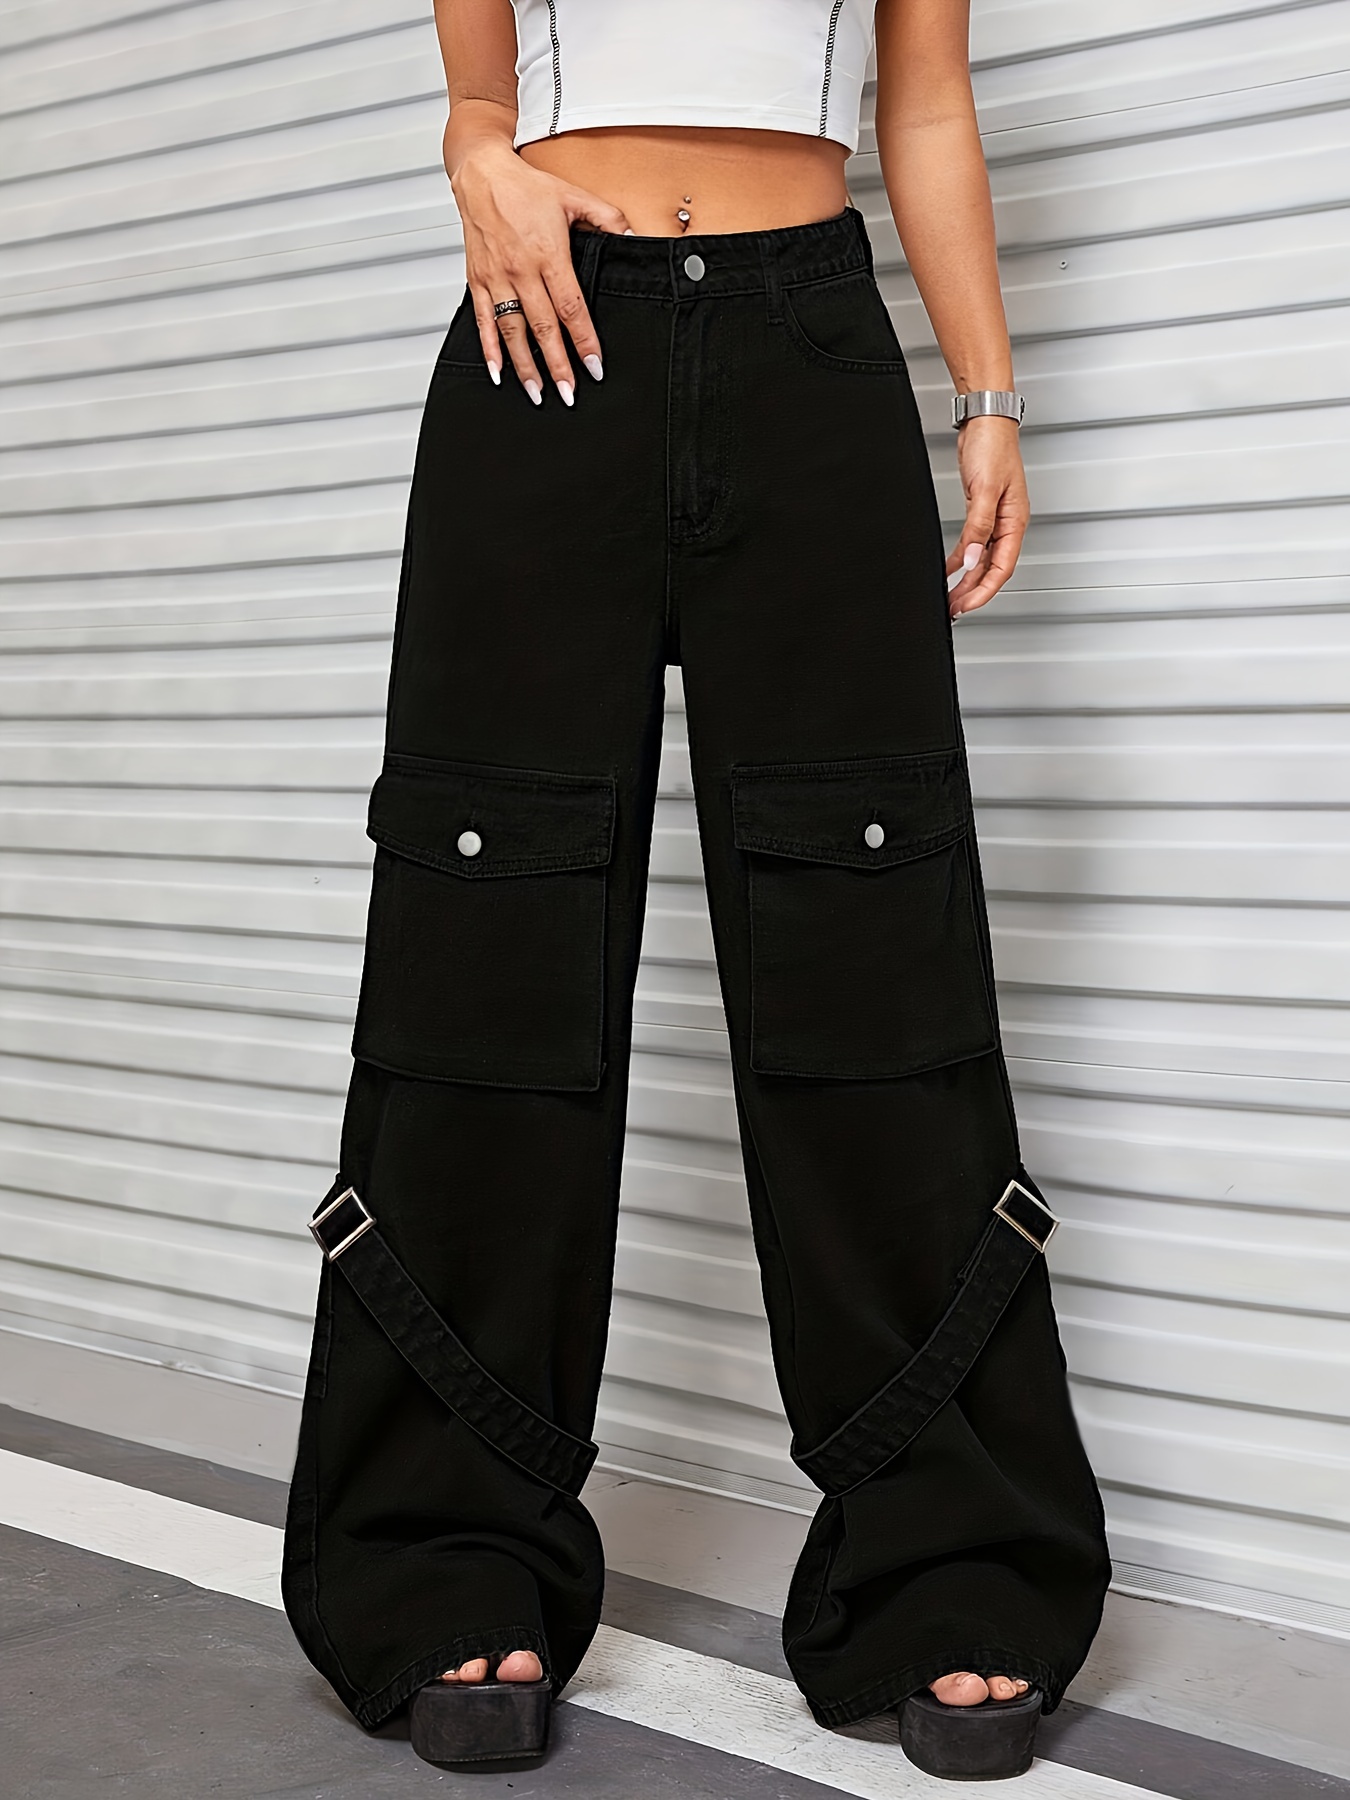 Fashion (Loose Cargo Black)Cargo Y2k Baggy Jeans Stacked Pants